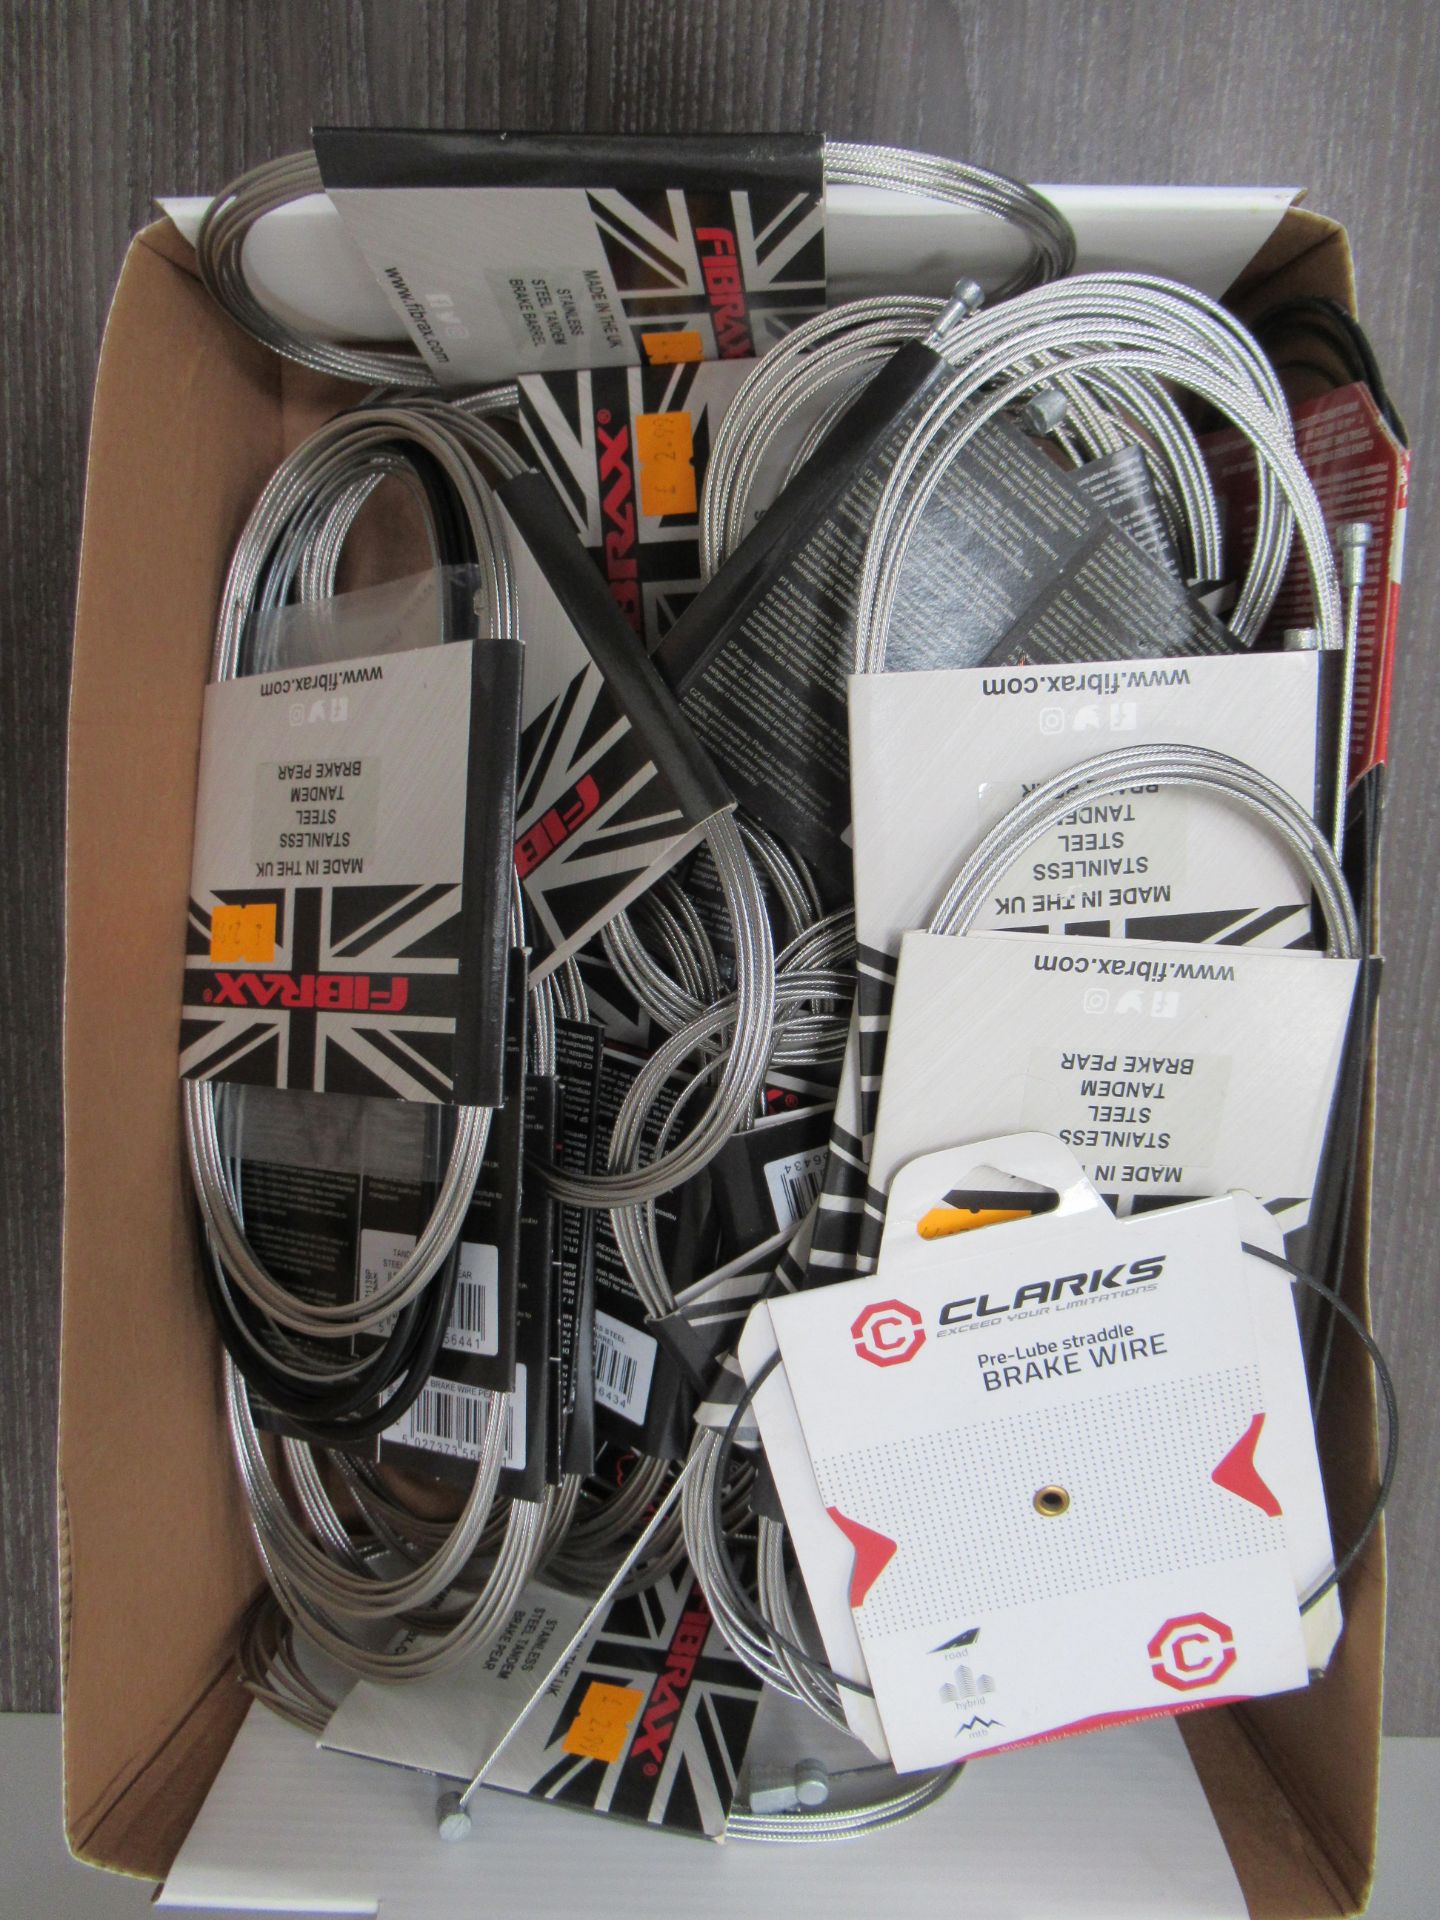 Box of Fibrex stainless steel brake wire - Image 2 of 2